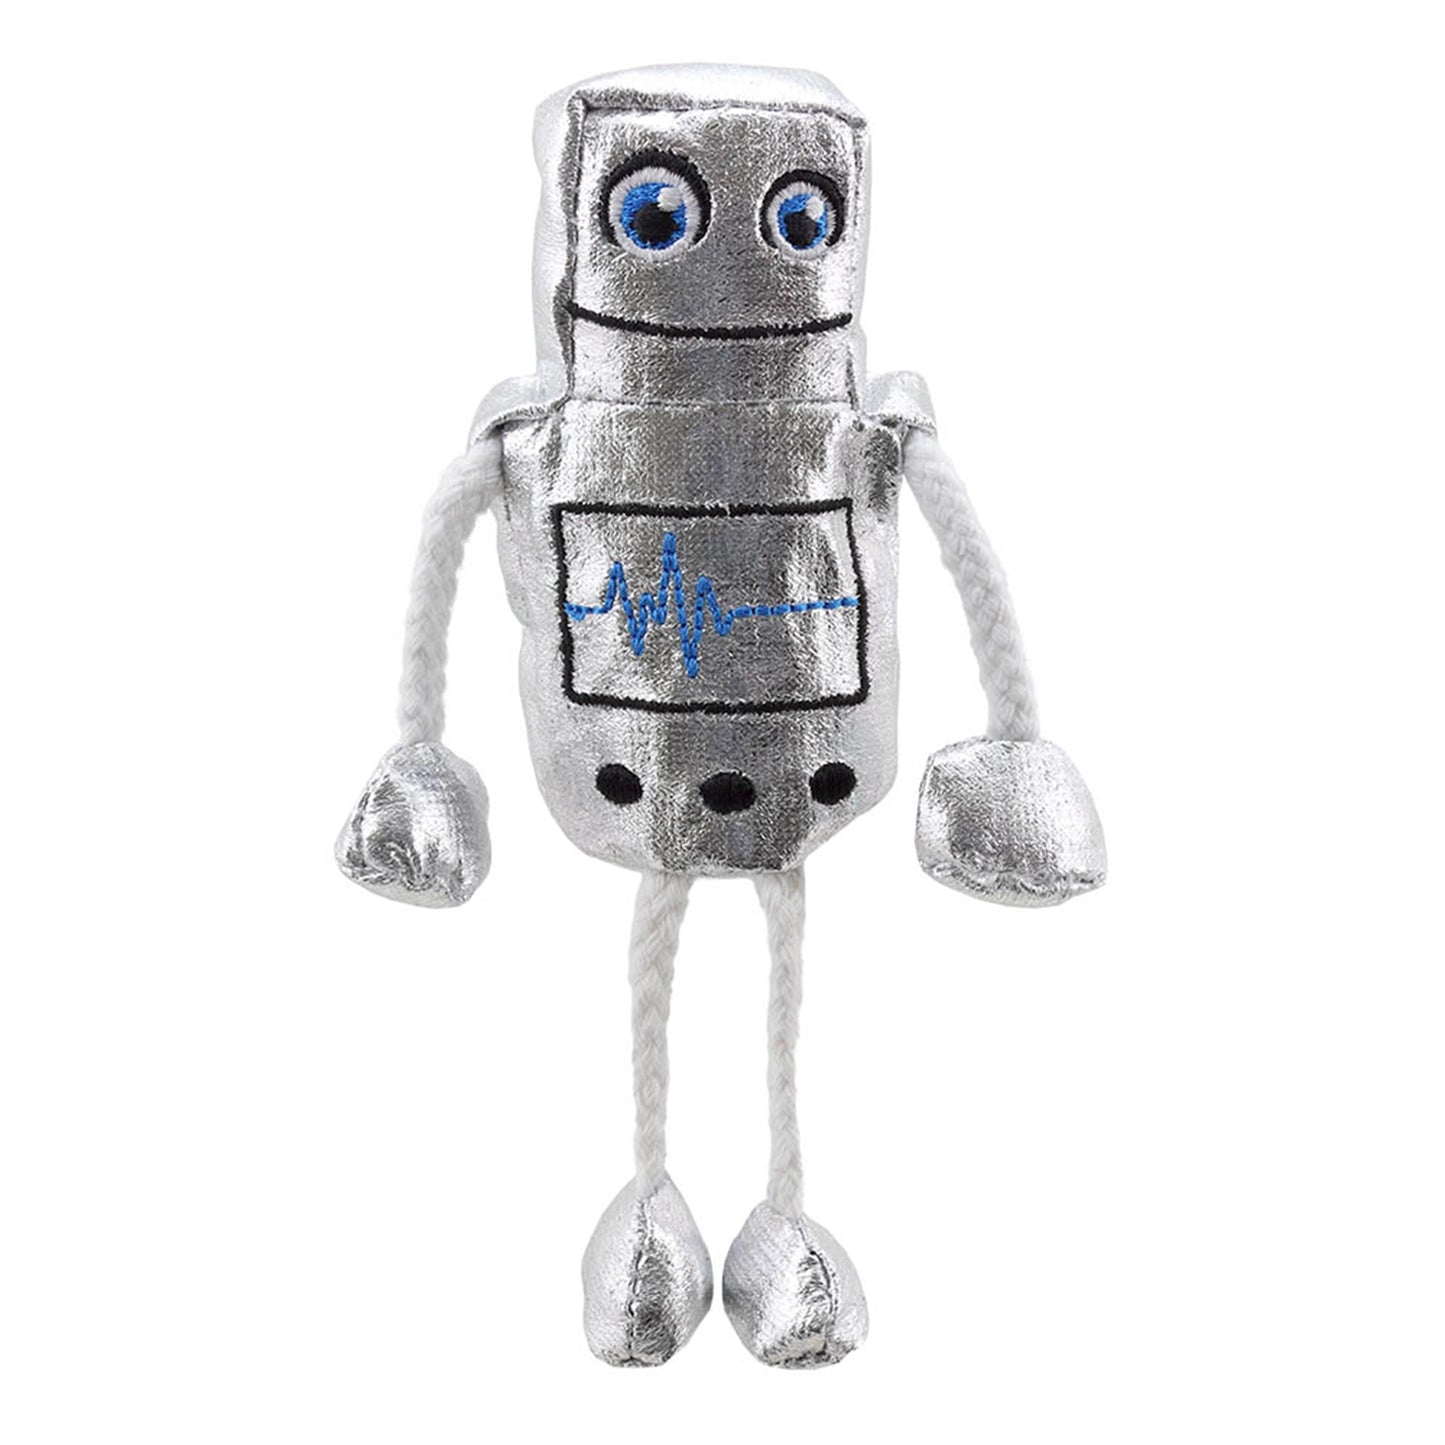 Robot Finger Puppet - The Puppet Company - The Forgotten Toy Shop